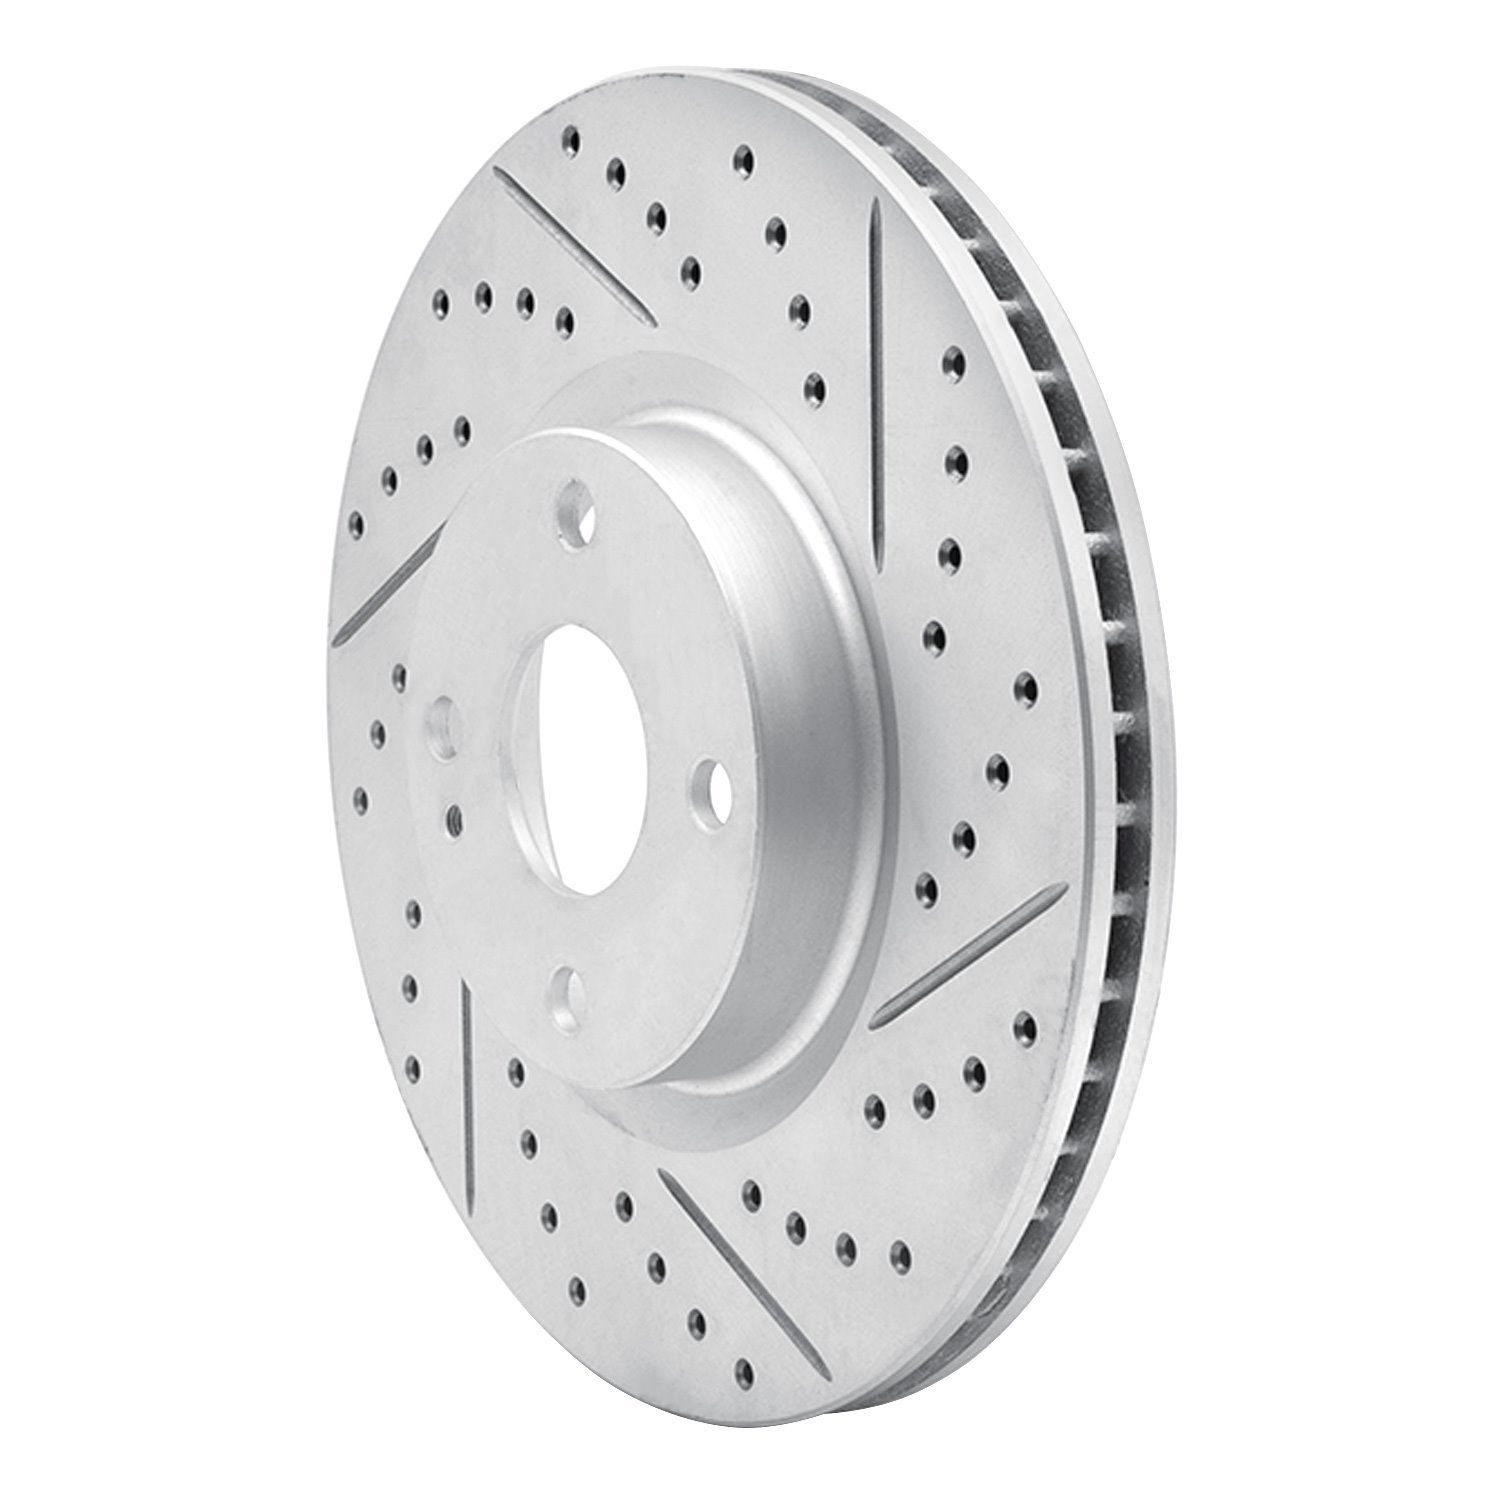 830-80074R Geoperformance Drilled/Slotted Brake Rotor, Fits Select Multiple Makes/Models, Position: Front Right